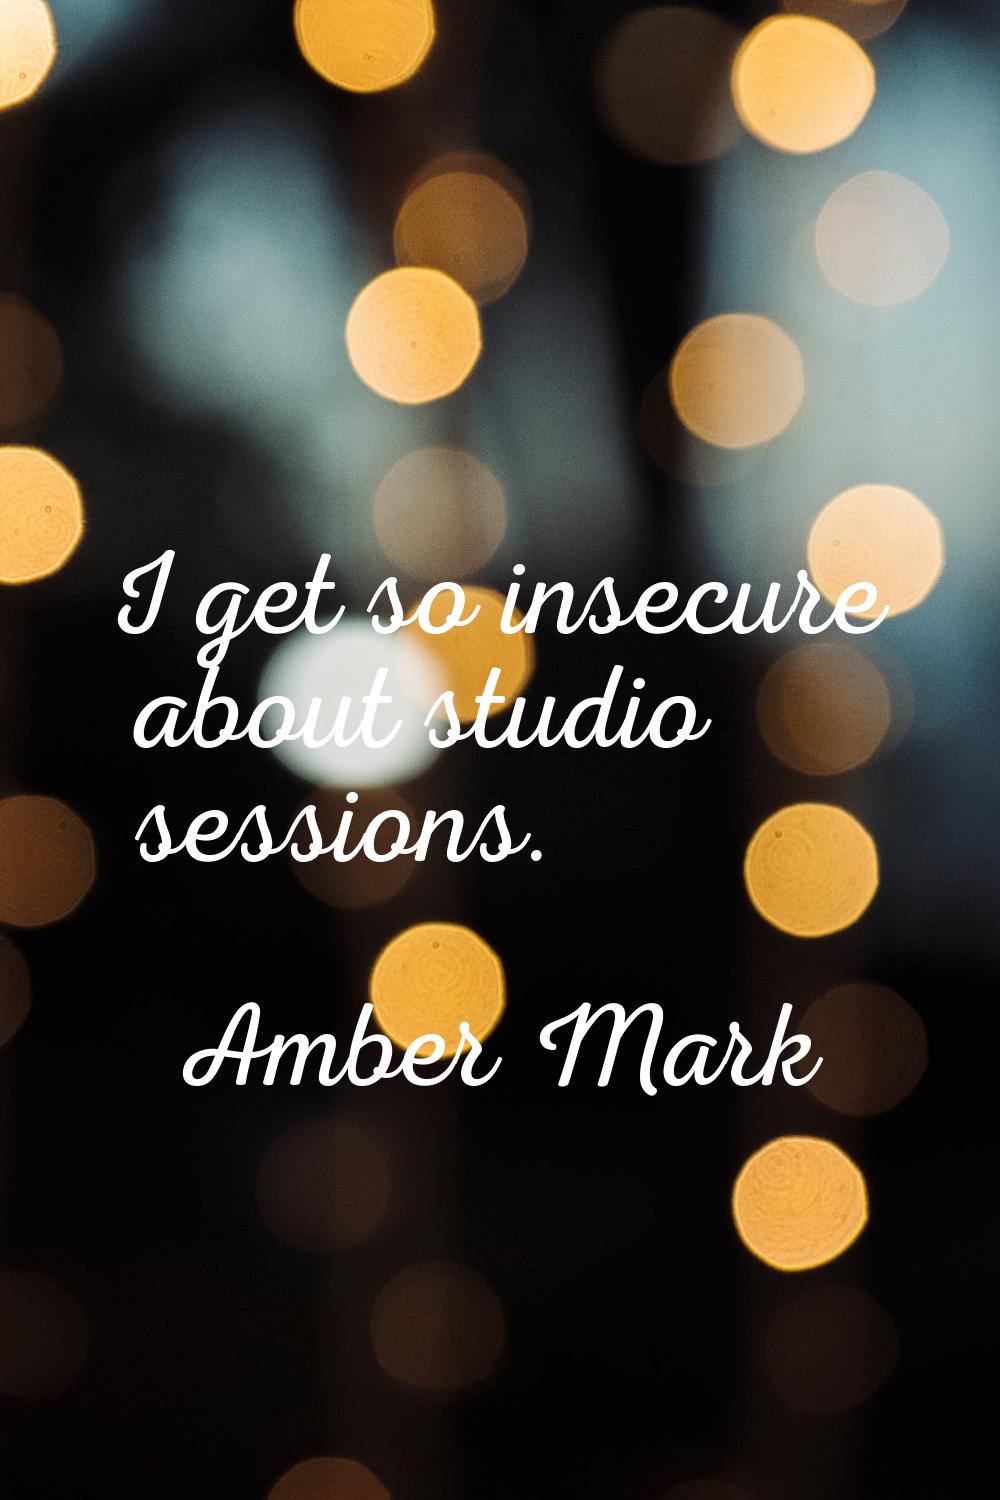 I get so insecure about studio sessions.